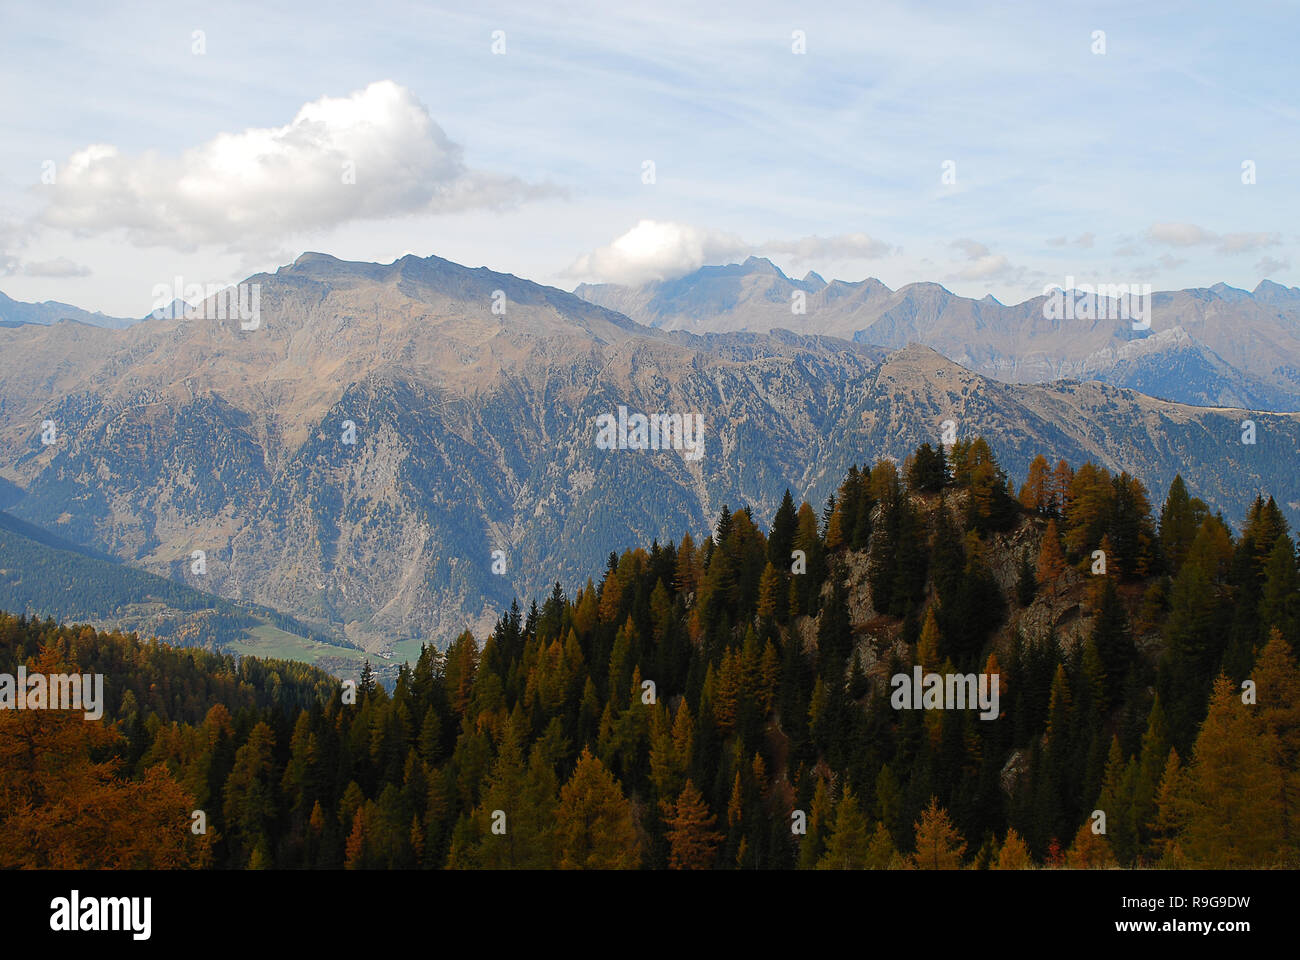 Sarntal Alps High Resolution Stock Photography and Images - Alamy